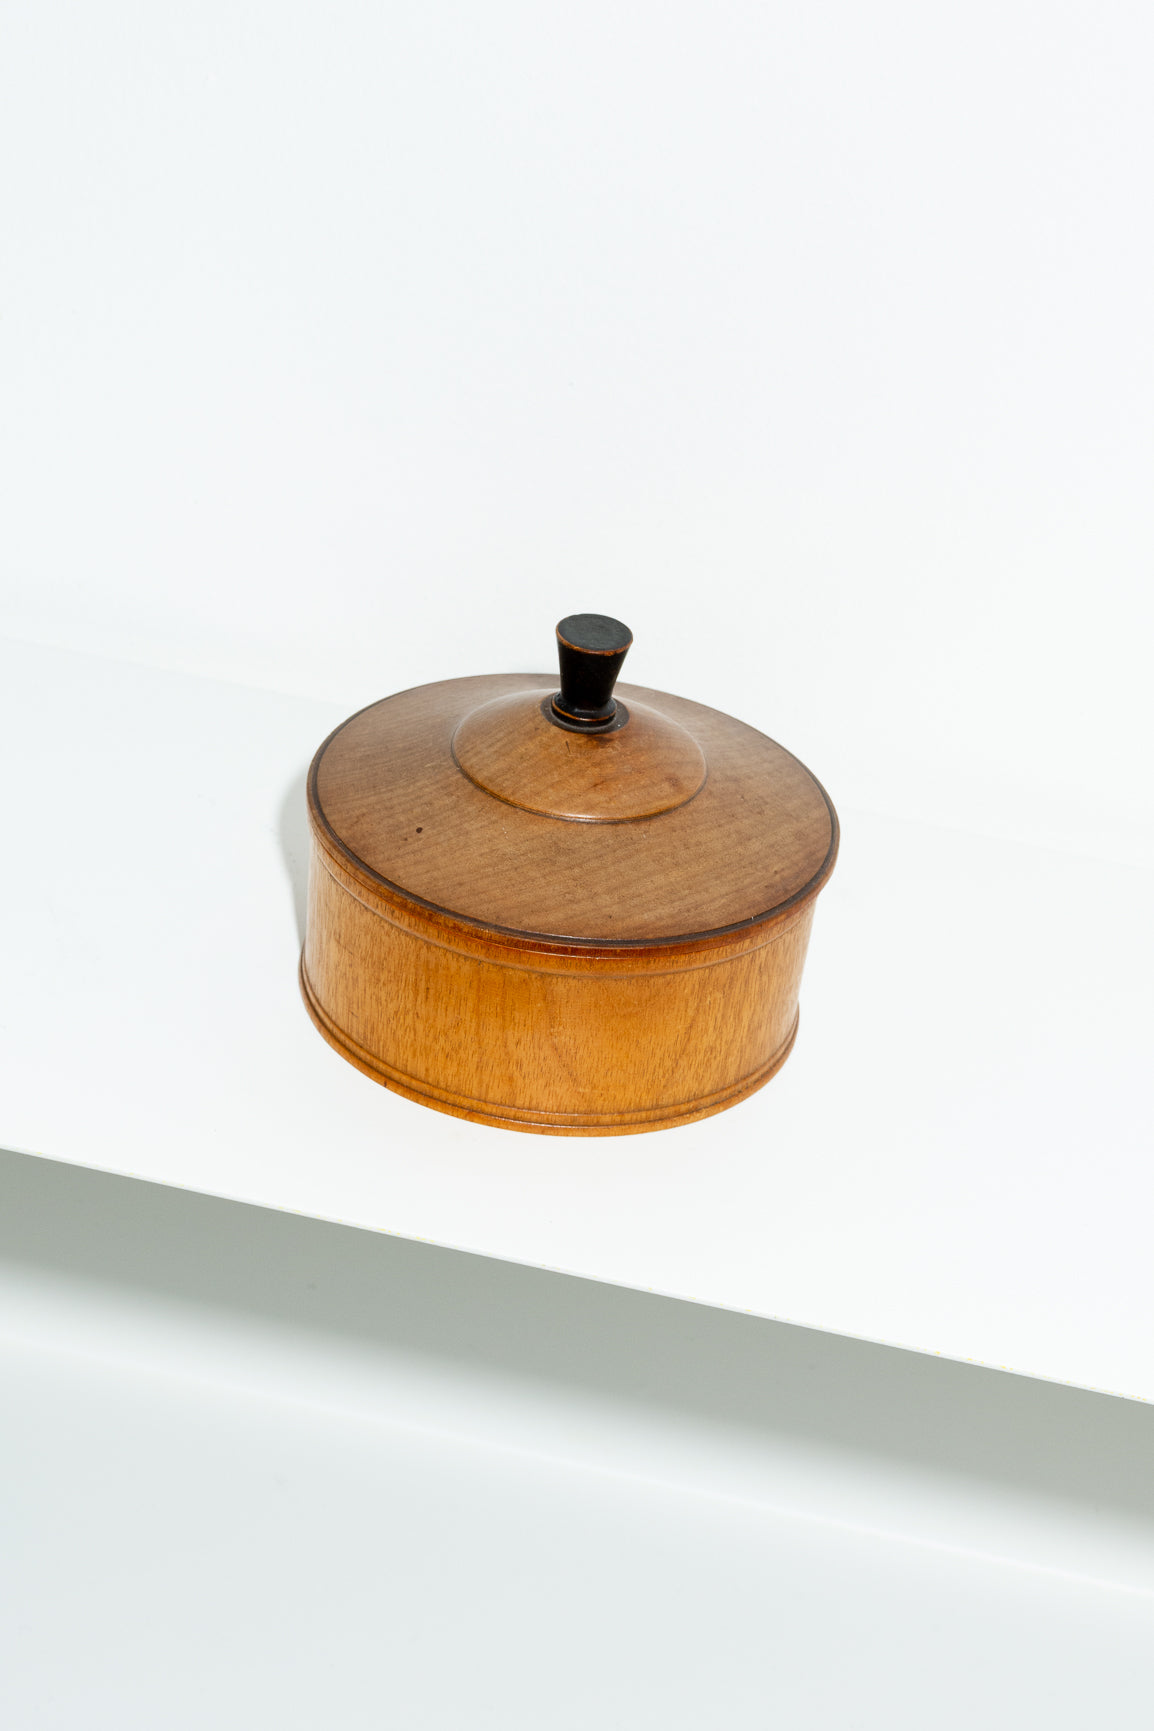 Hand turned vintage wooden pot with lid